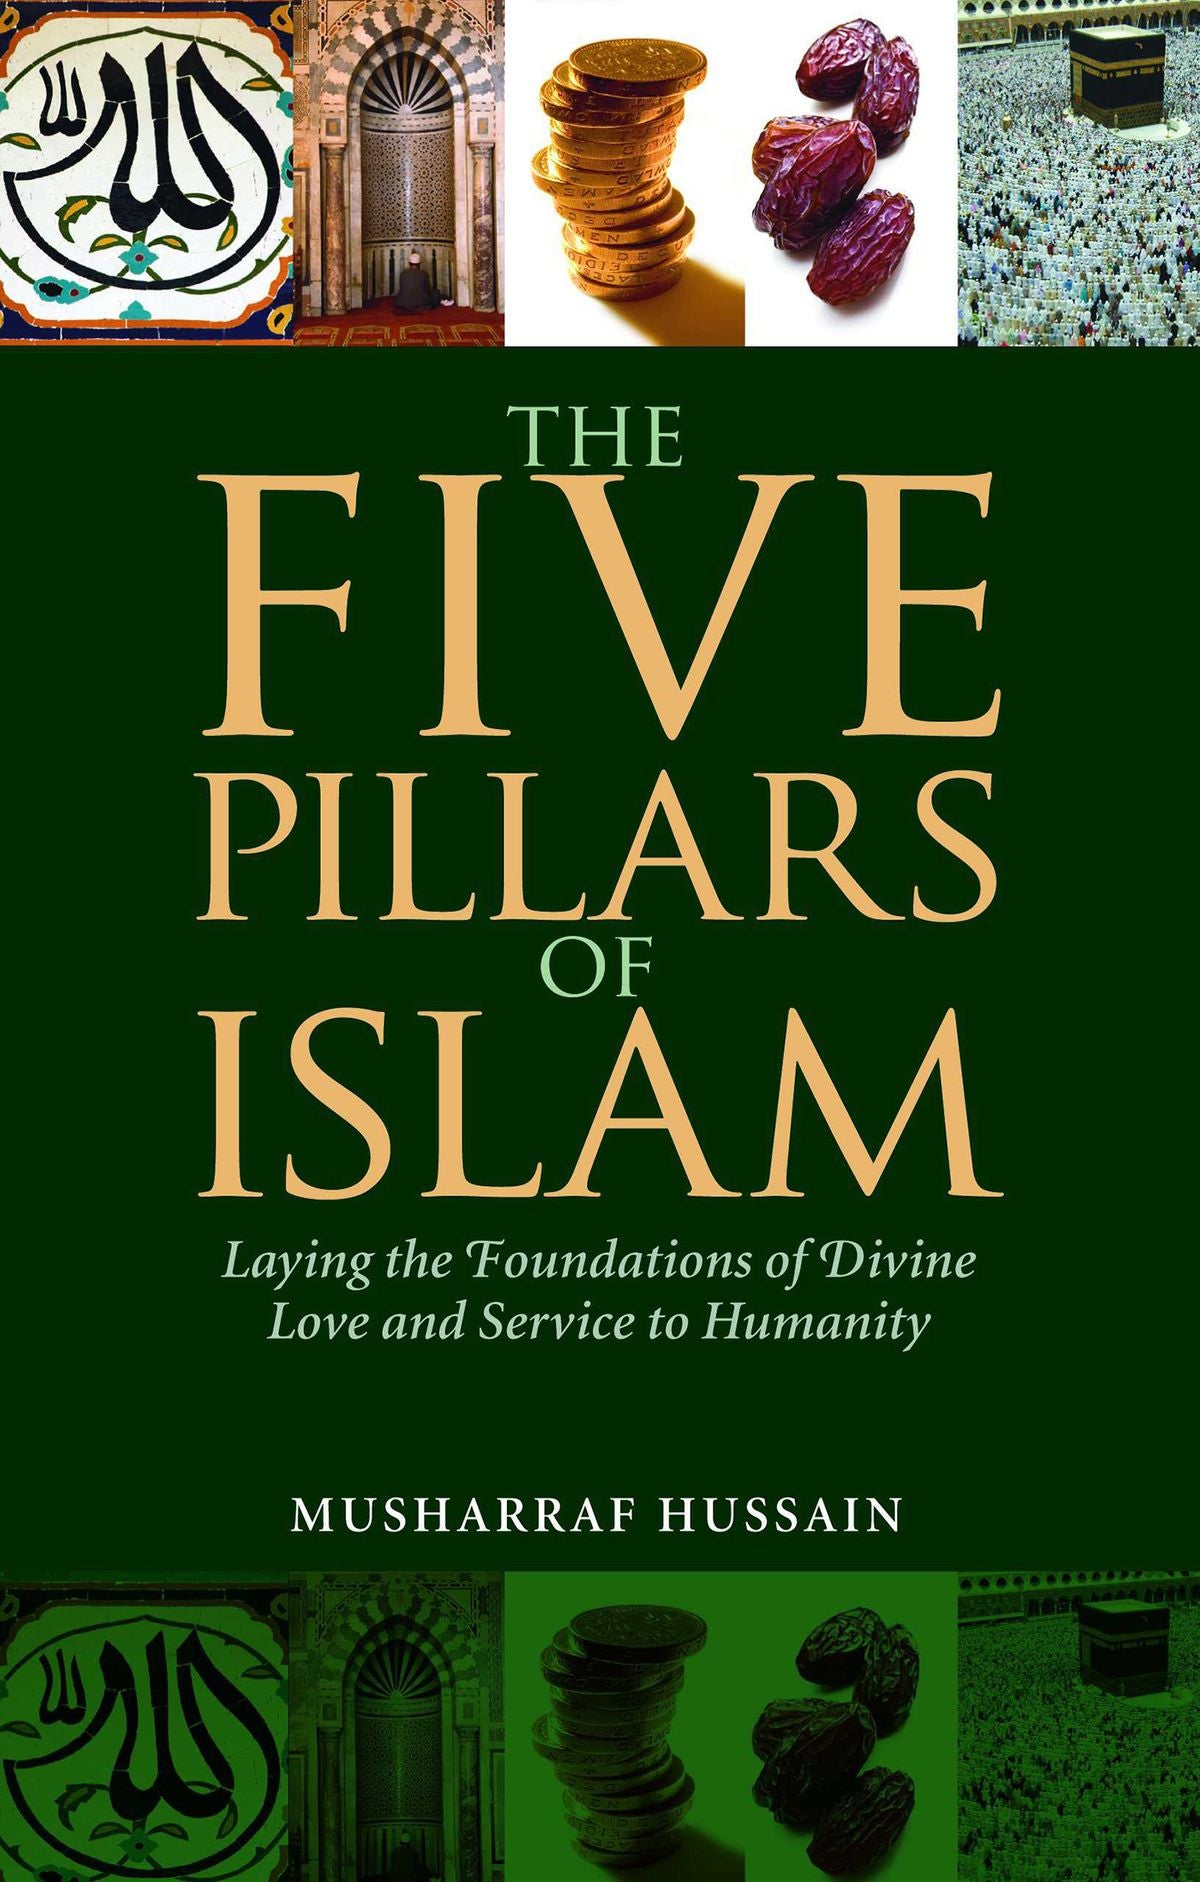 Five Pillars: Laying the Foundations of Divine Love and Service to Humanity